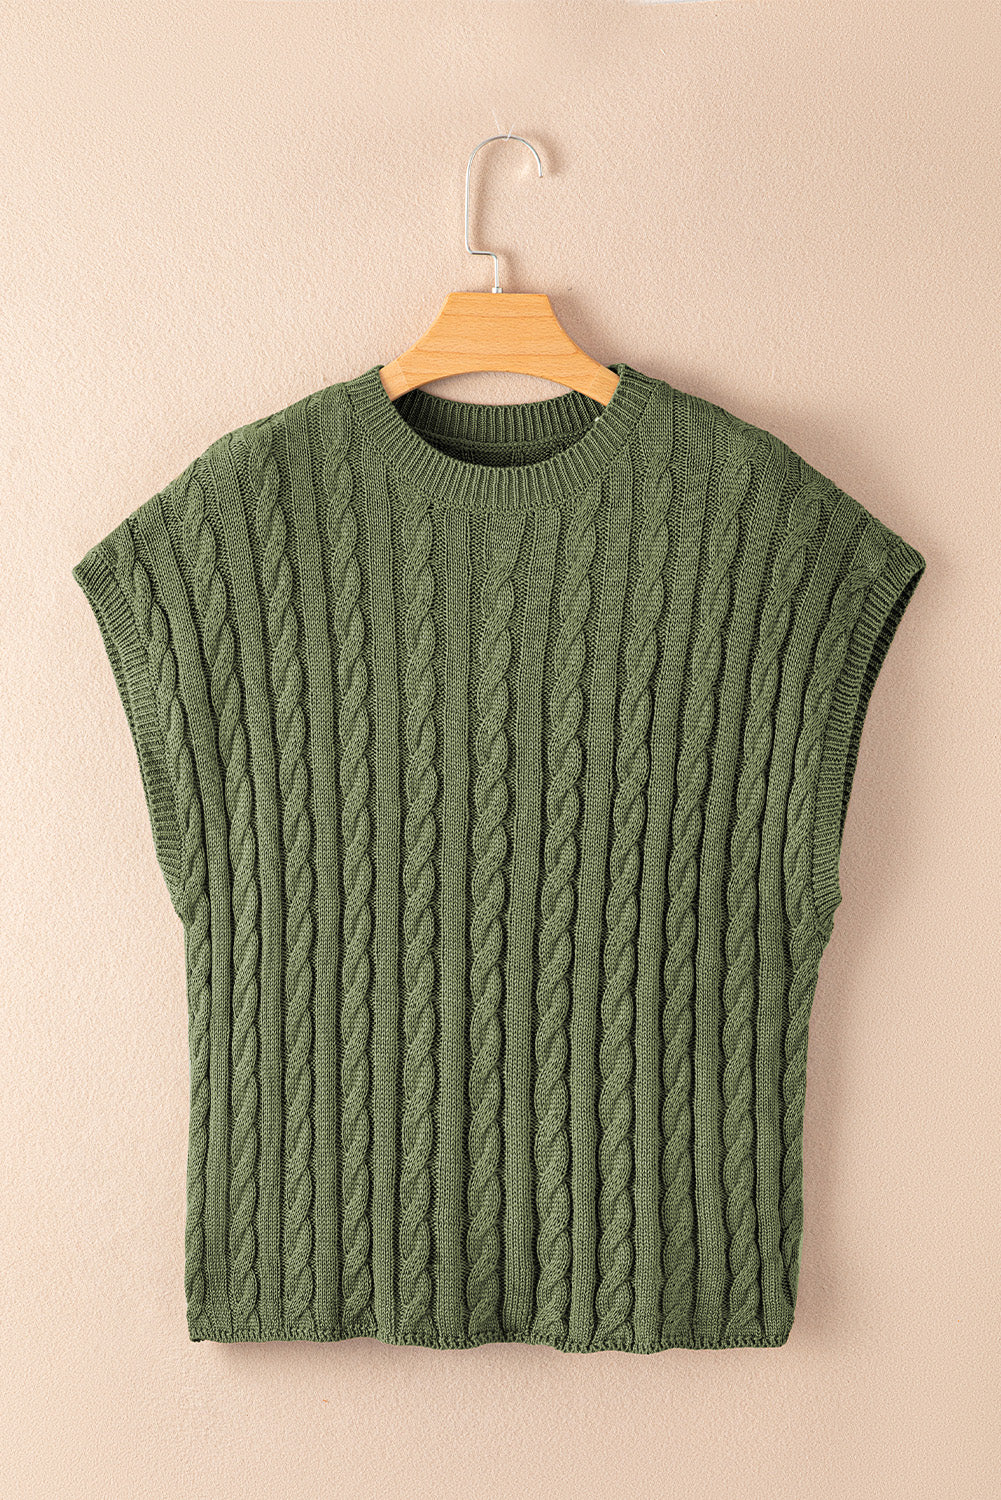 Gray Solid Cable Knit Short Sleeve Roun Neck Sweater